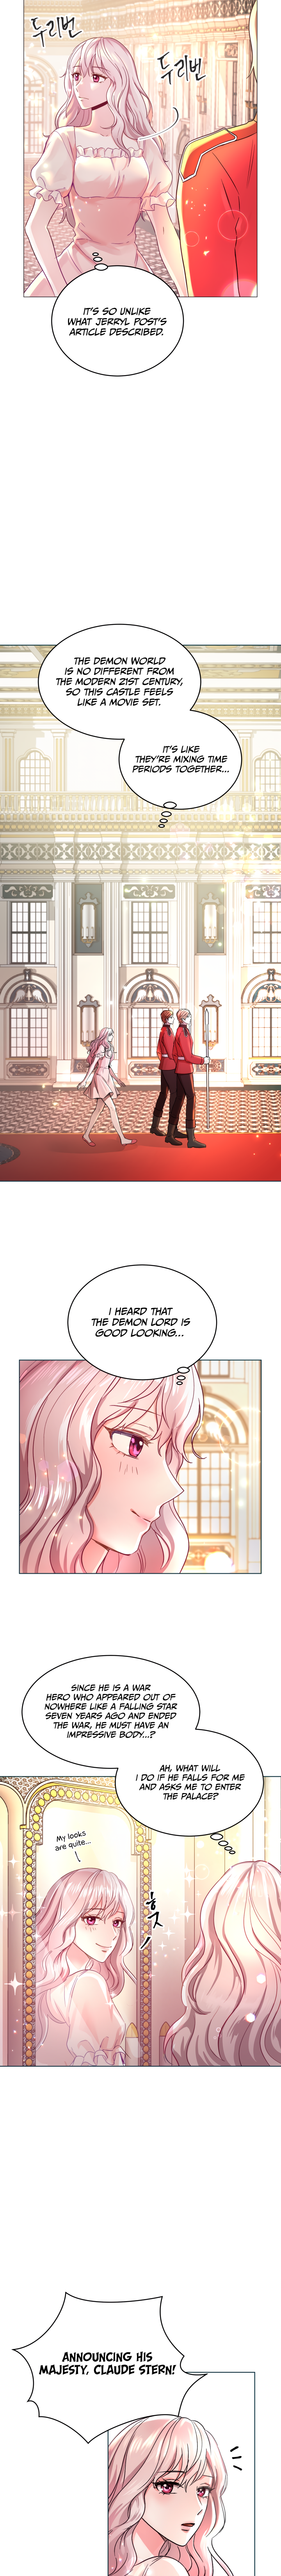 The Demon Lord's 5500 Shadows Chapter 1 page 5